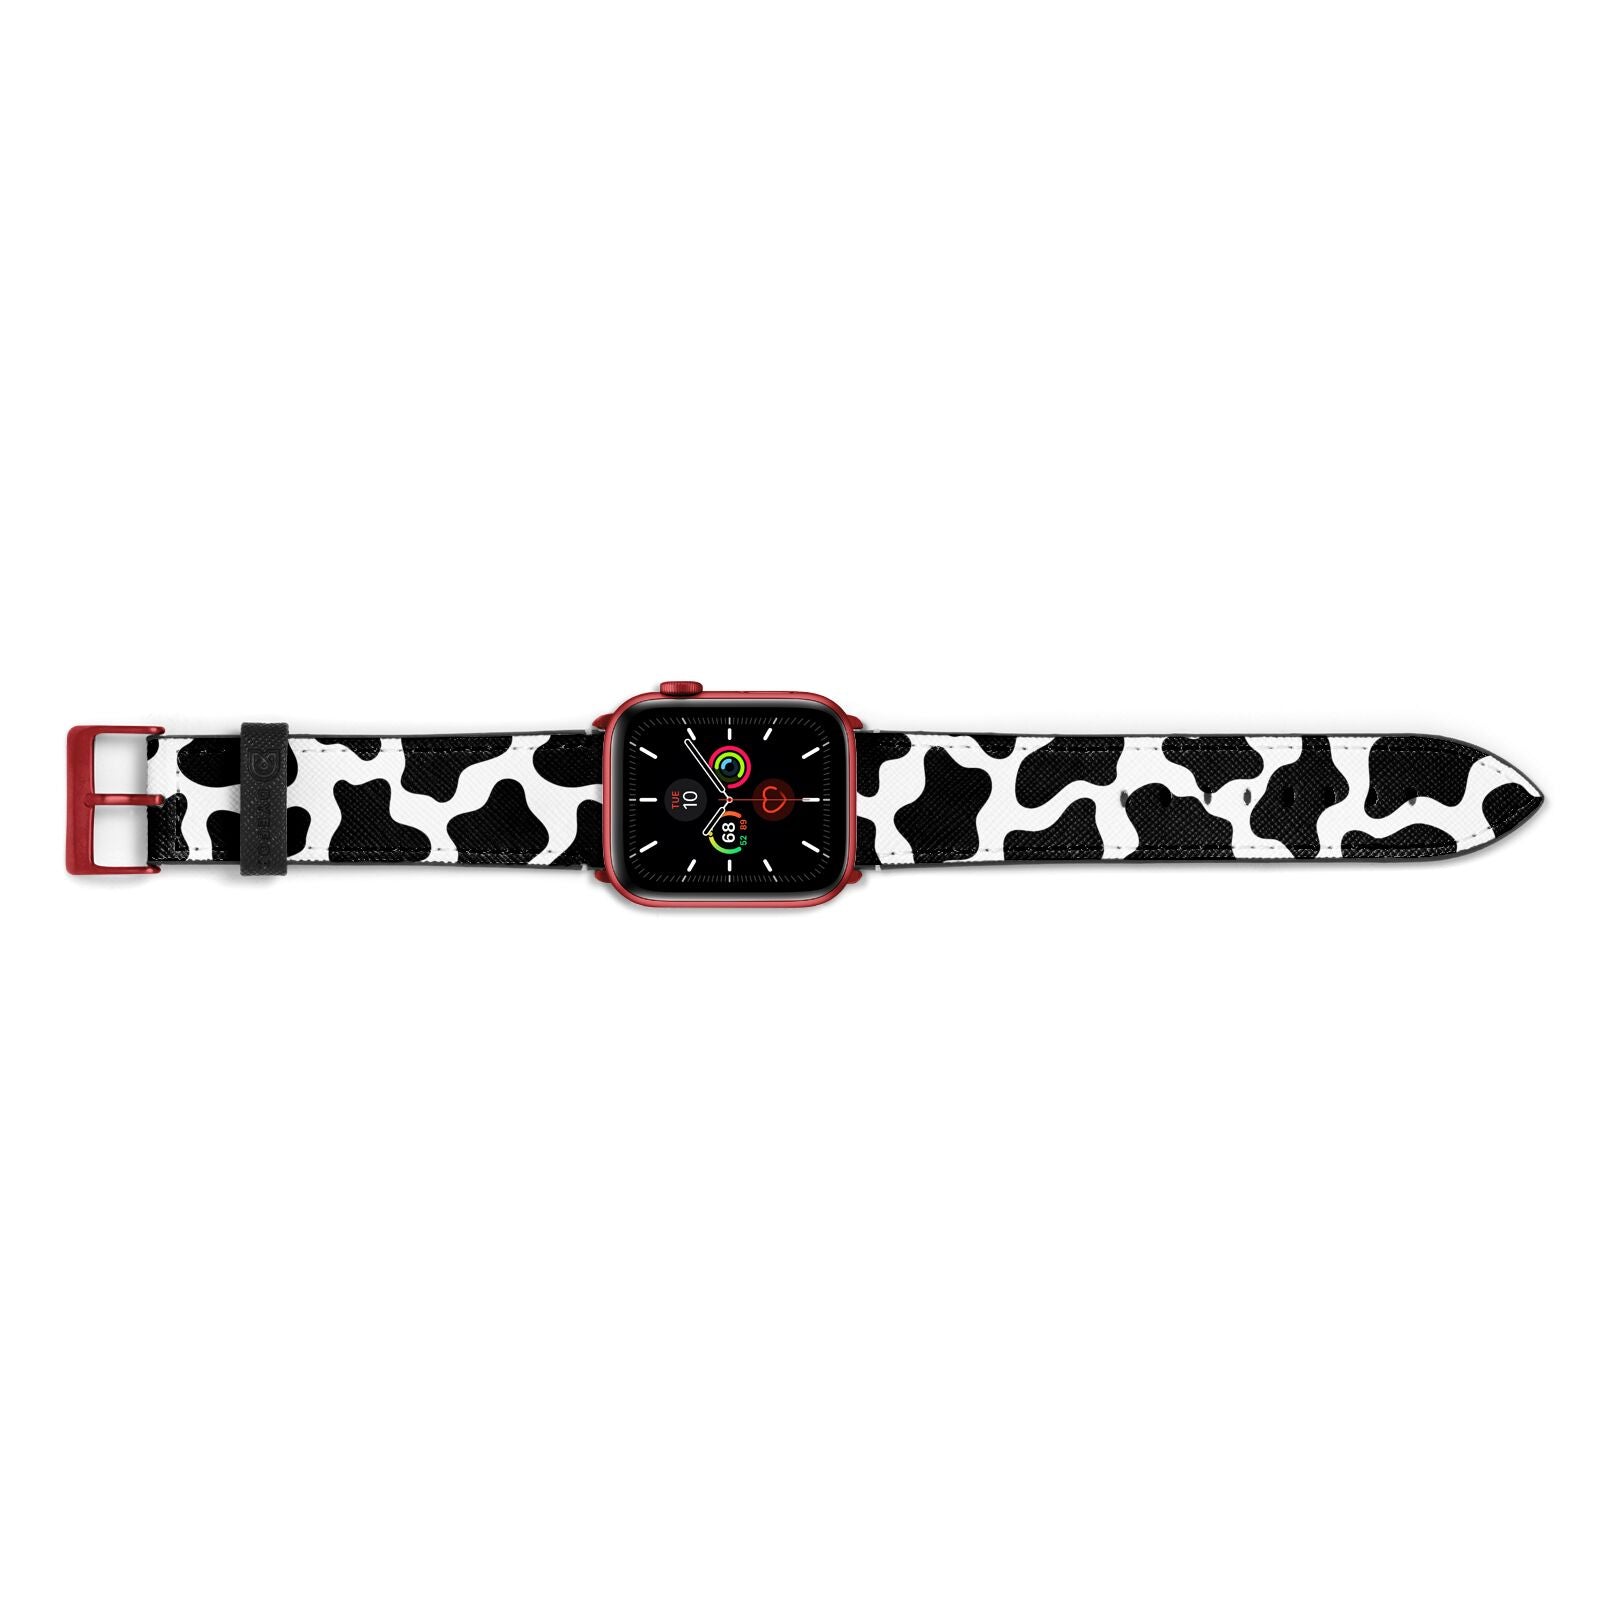 Cow Print Apple Watch Strap Landscape Image Red Hardware